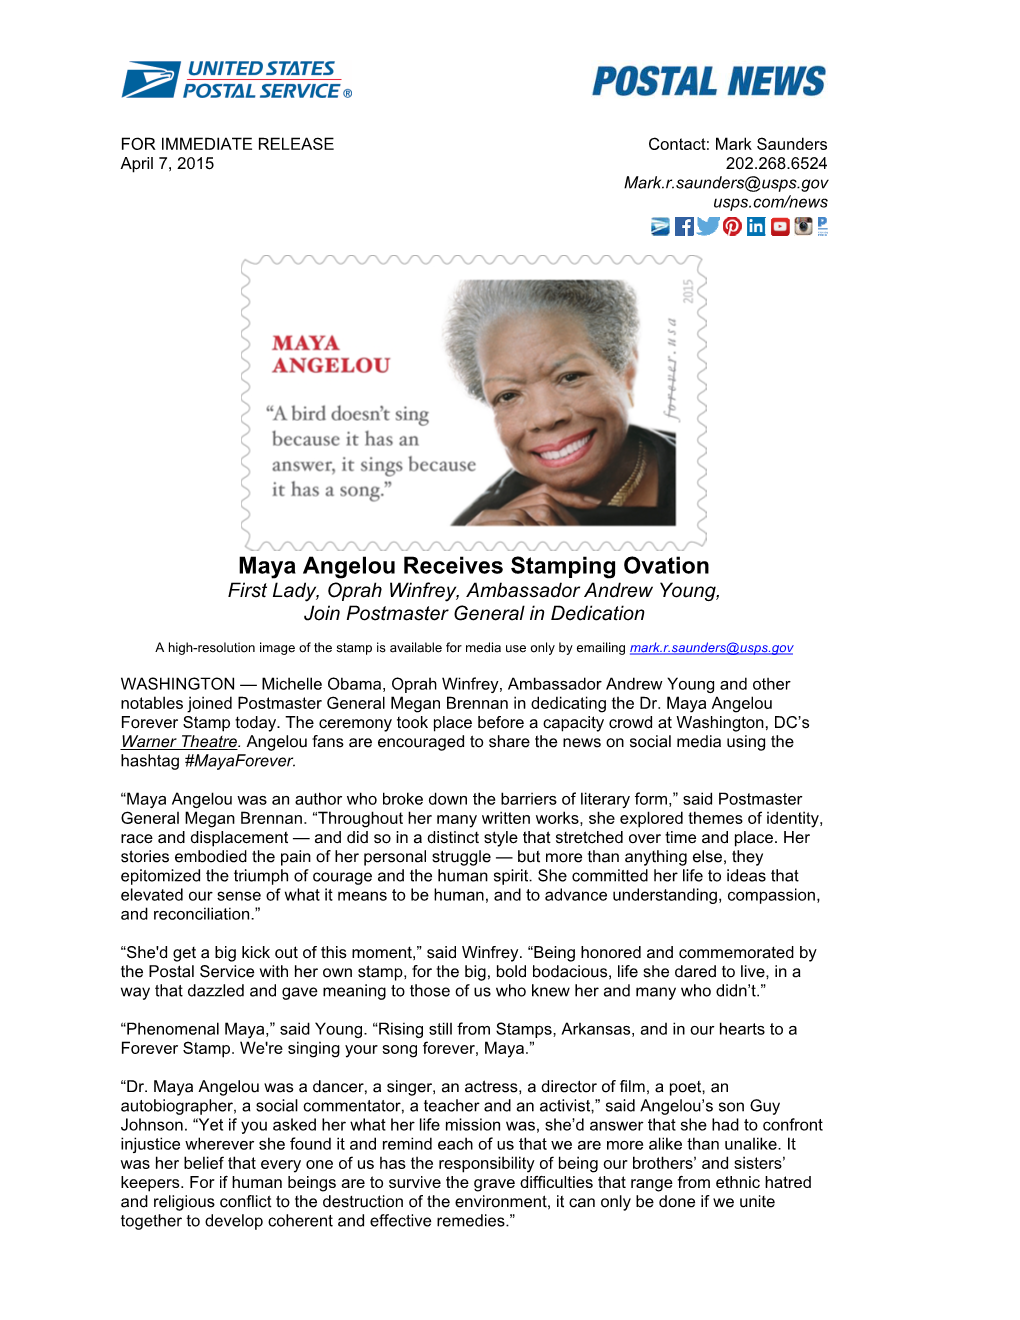 Maya Angelou Receives Stamping Ovation First Lady, Oprah Winfrey, Ambassador Andrew Young, Join Postmaster General in Dedication